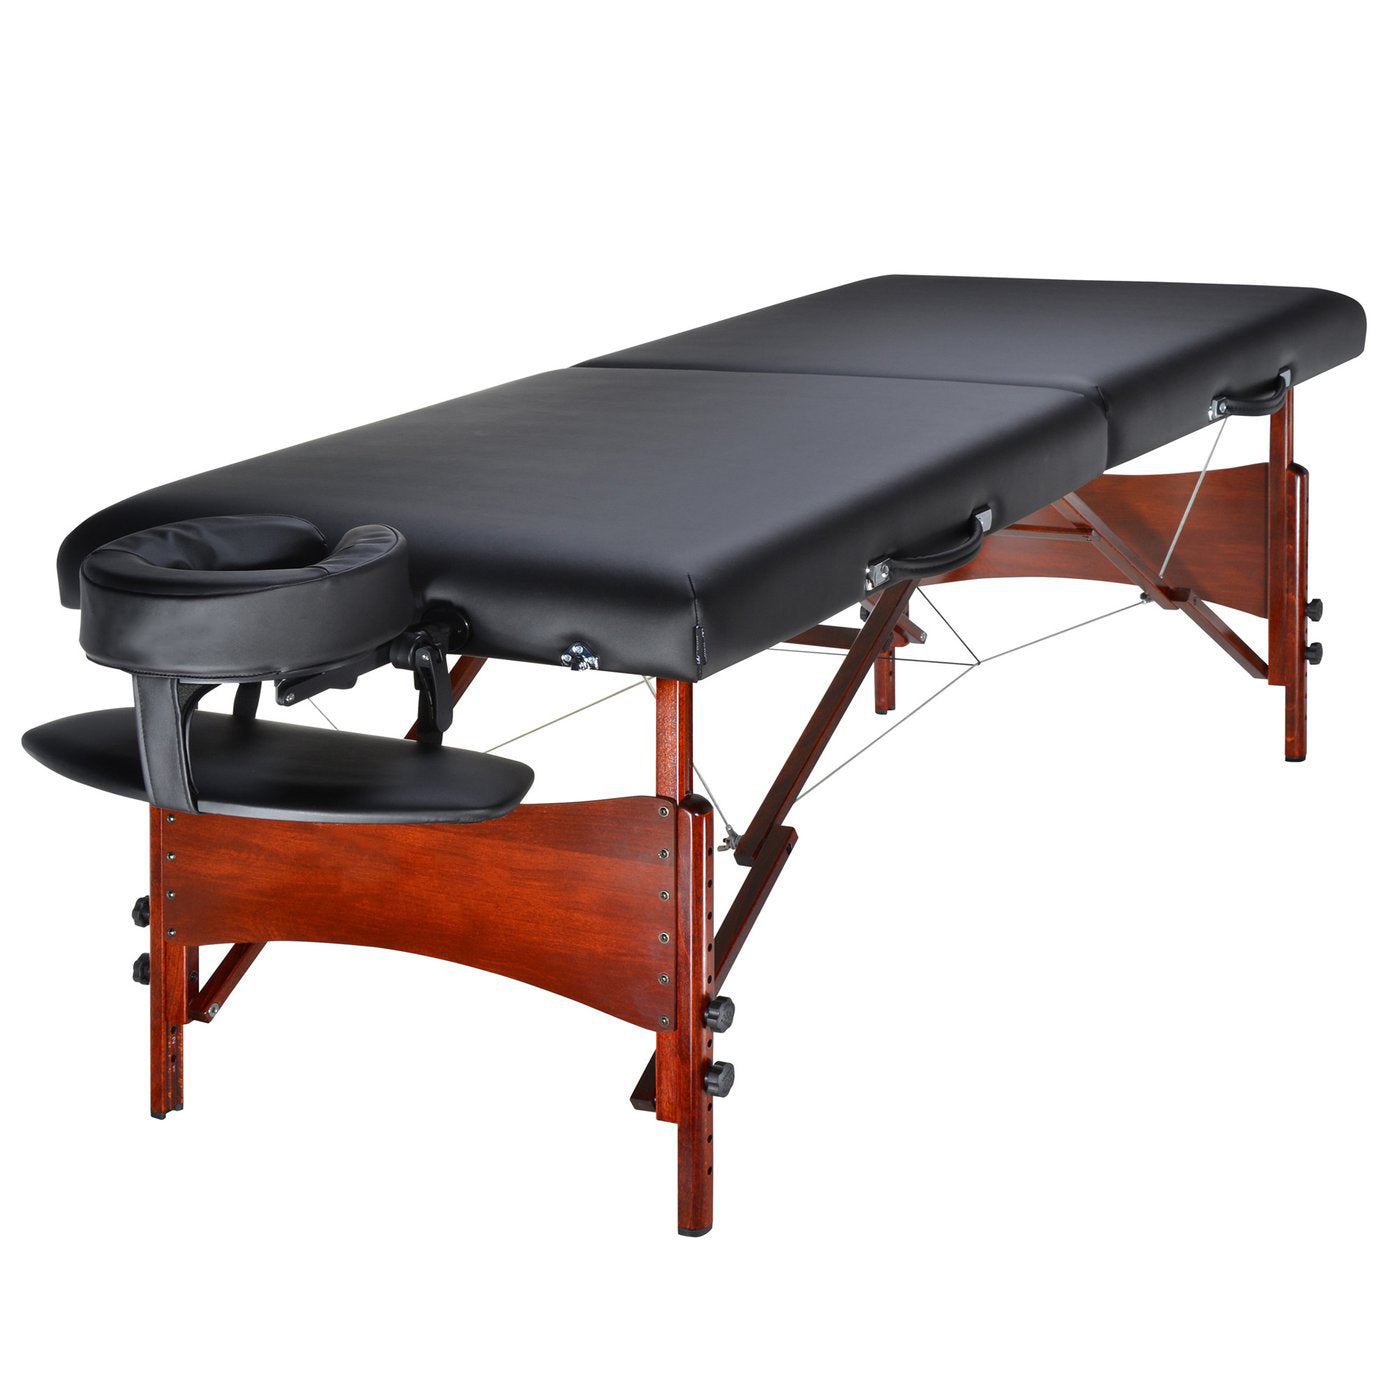 30" Newport™ Portable Massage Table Package with Best Selling Size